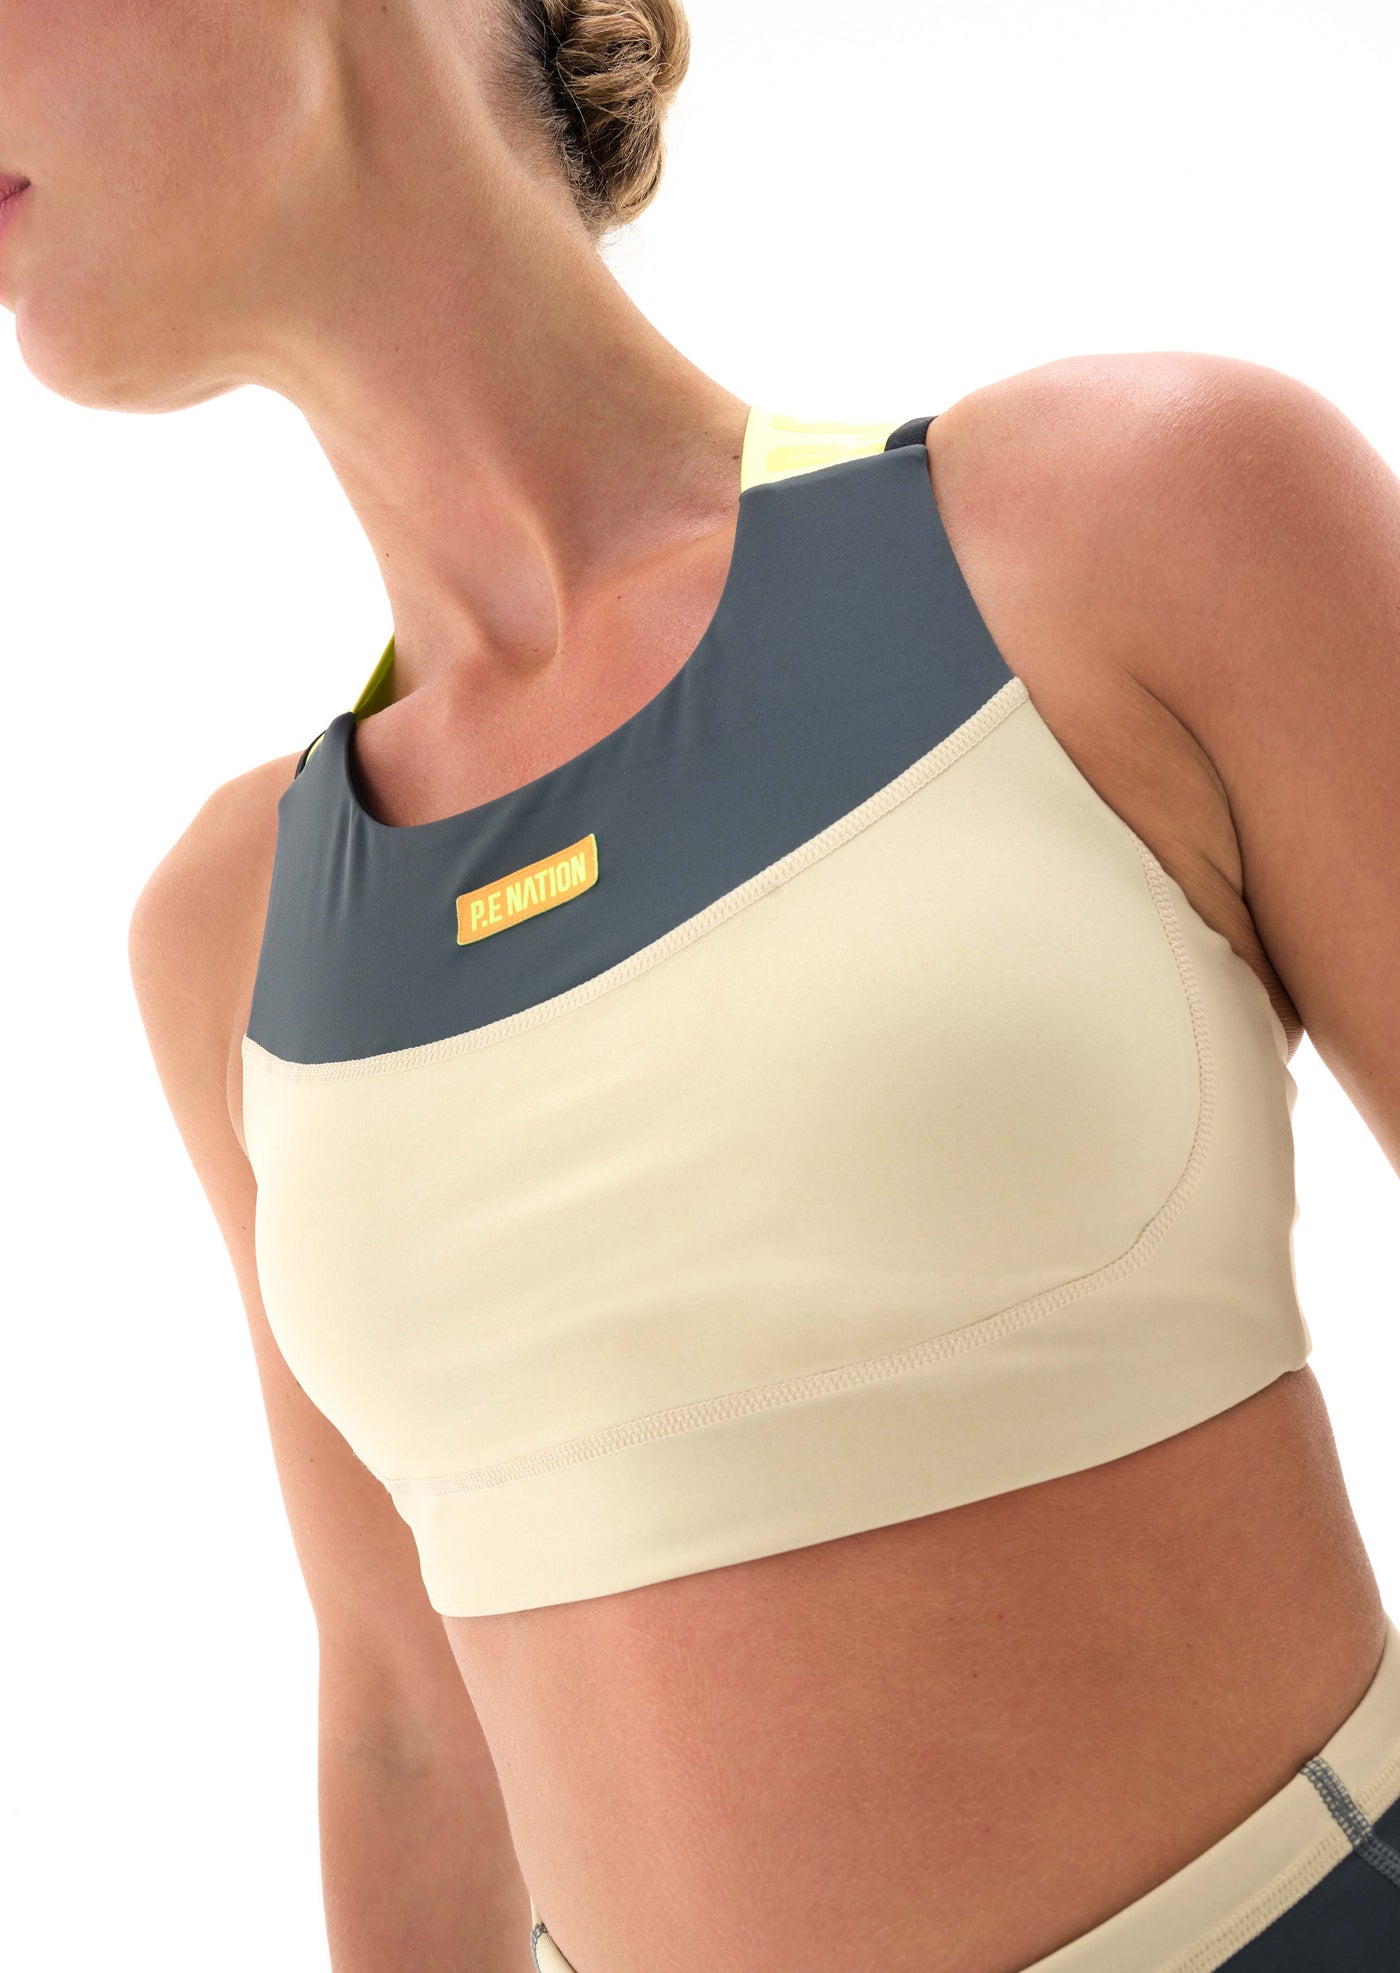 TRANSMISSION SPORTS BRA IN CHARCOAL